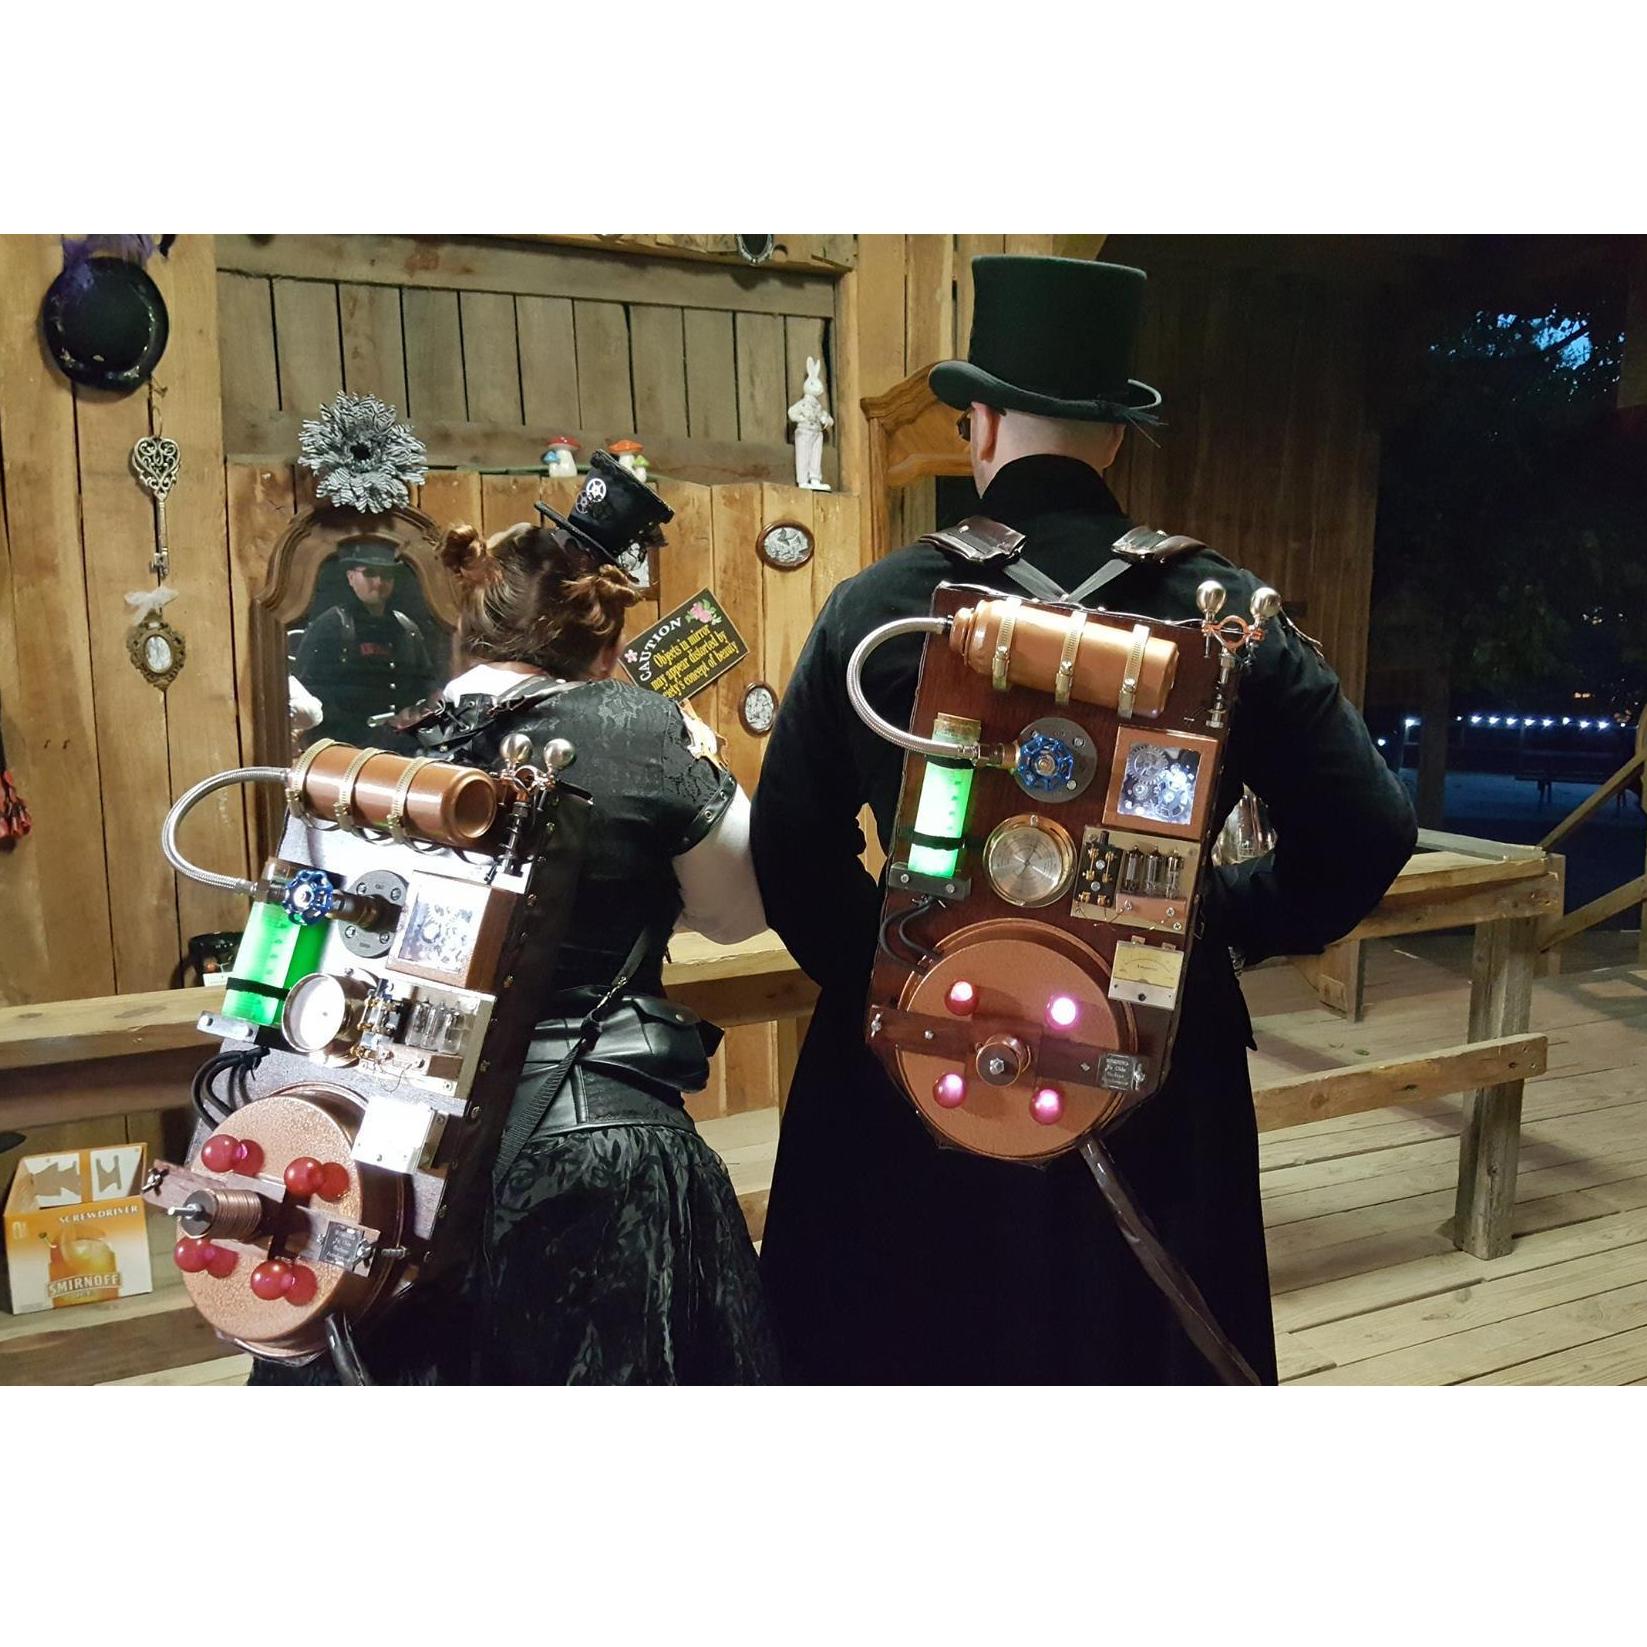 Our first time cosplaying as Steampunk Ghostbusters!